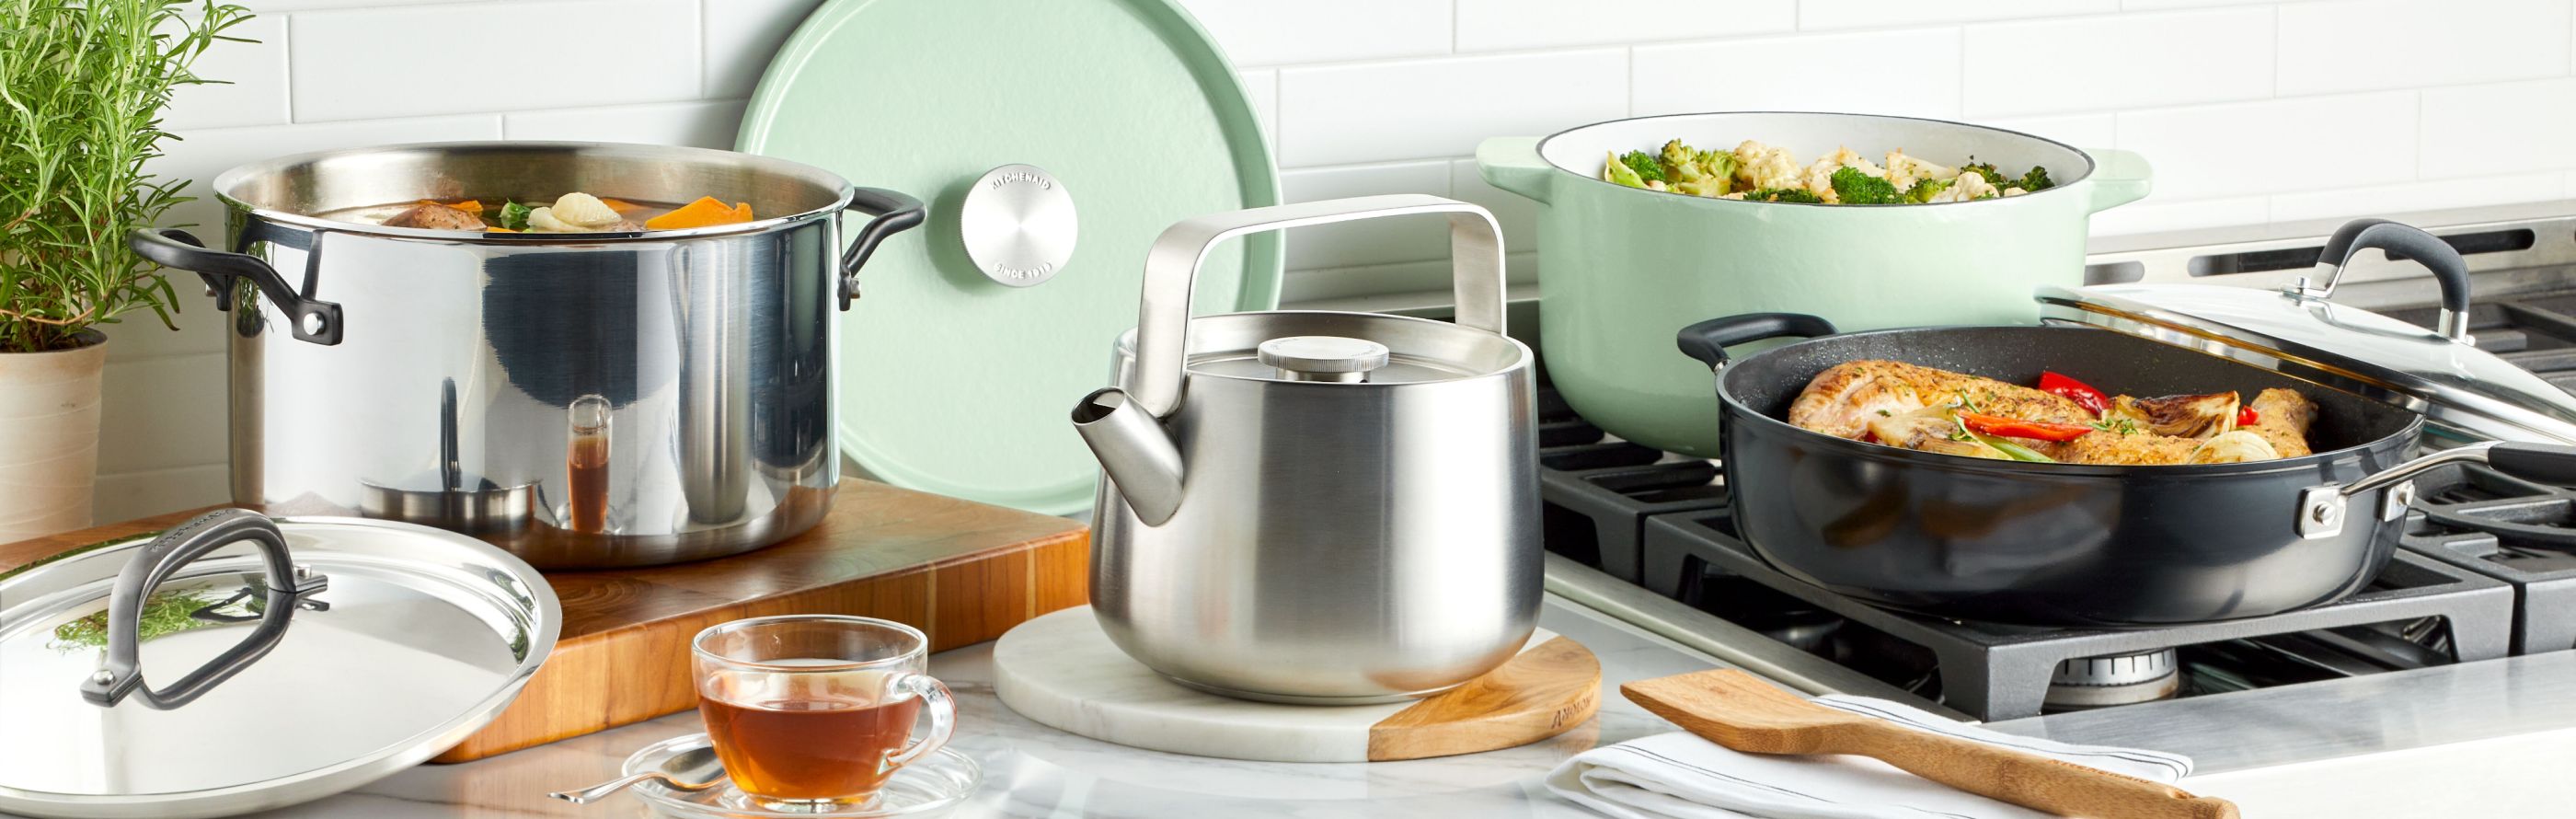 KitchenAid® Cookware being used over a stove.